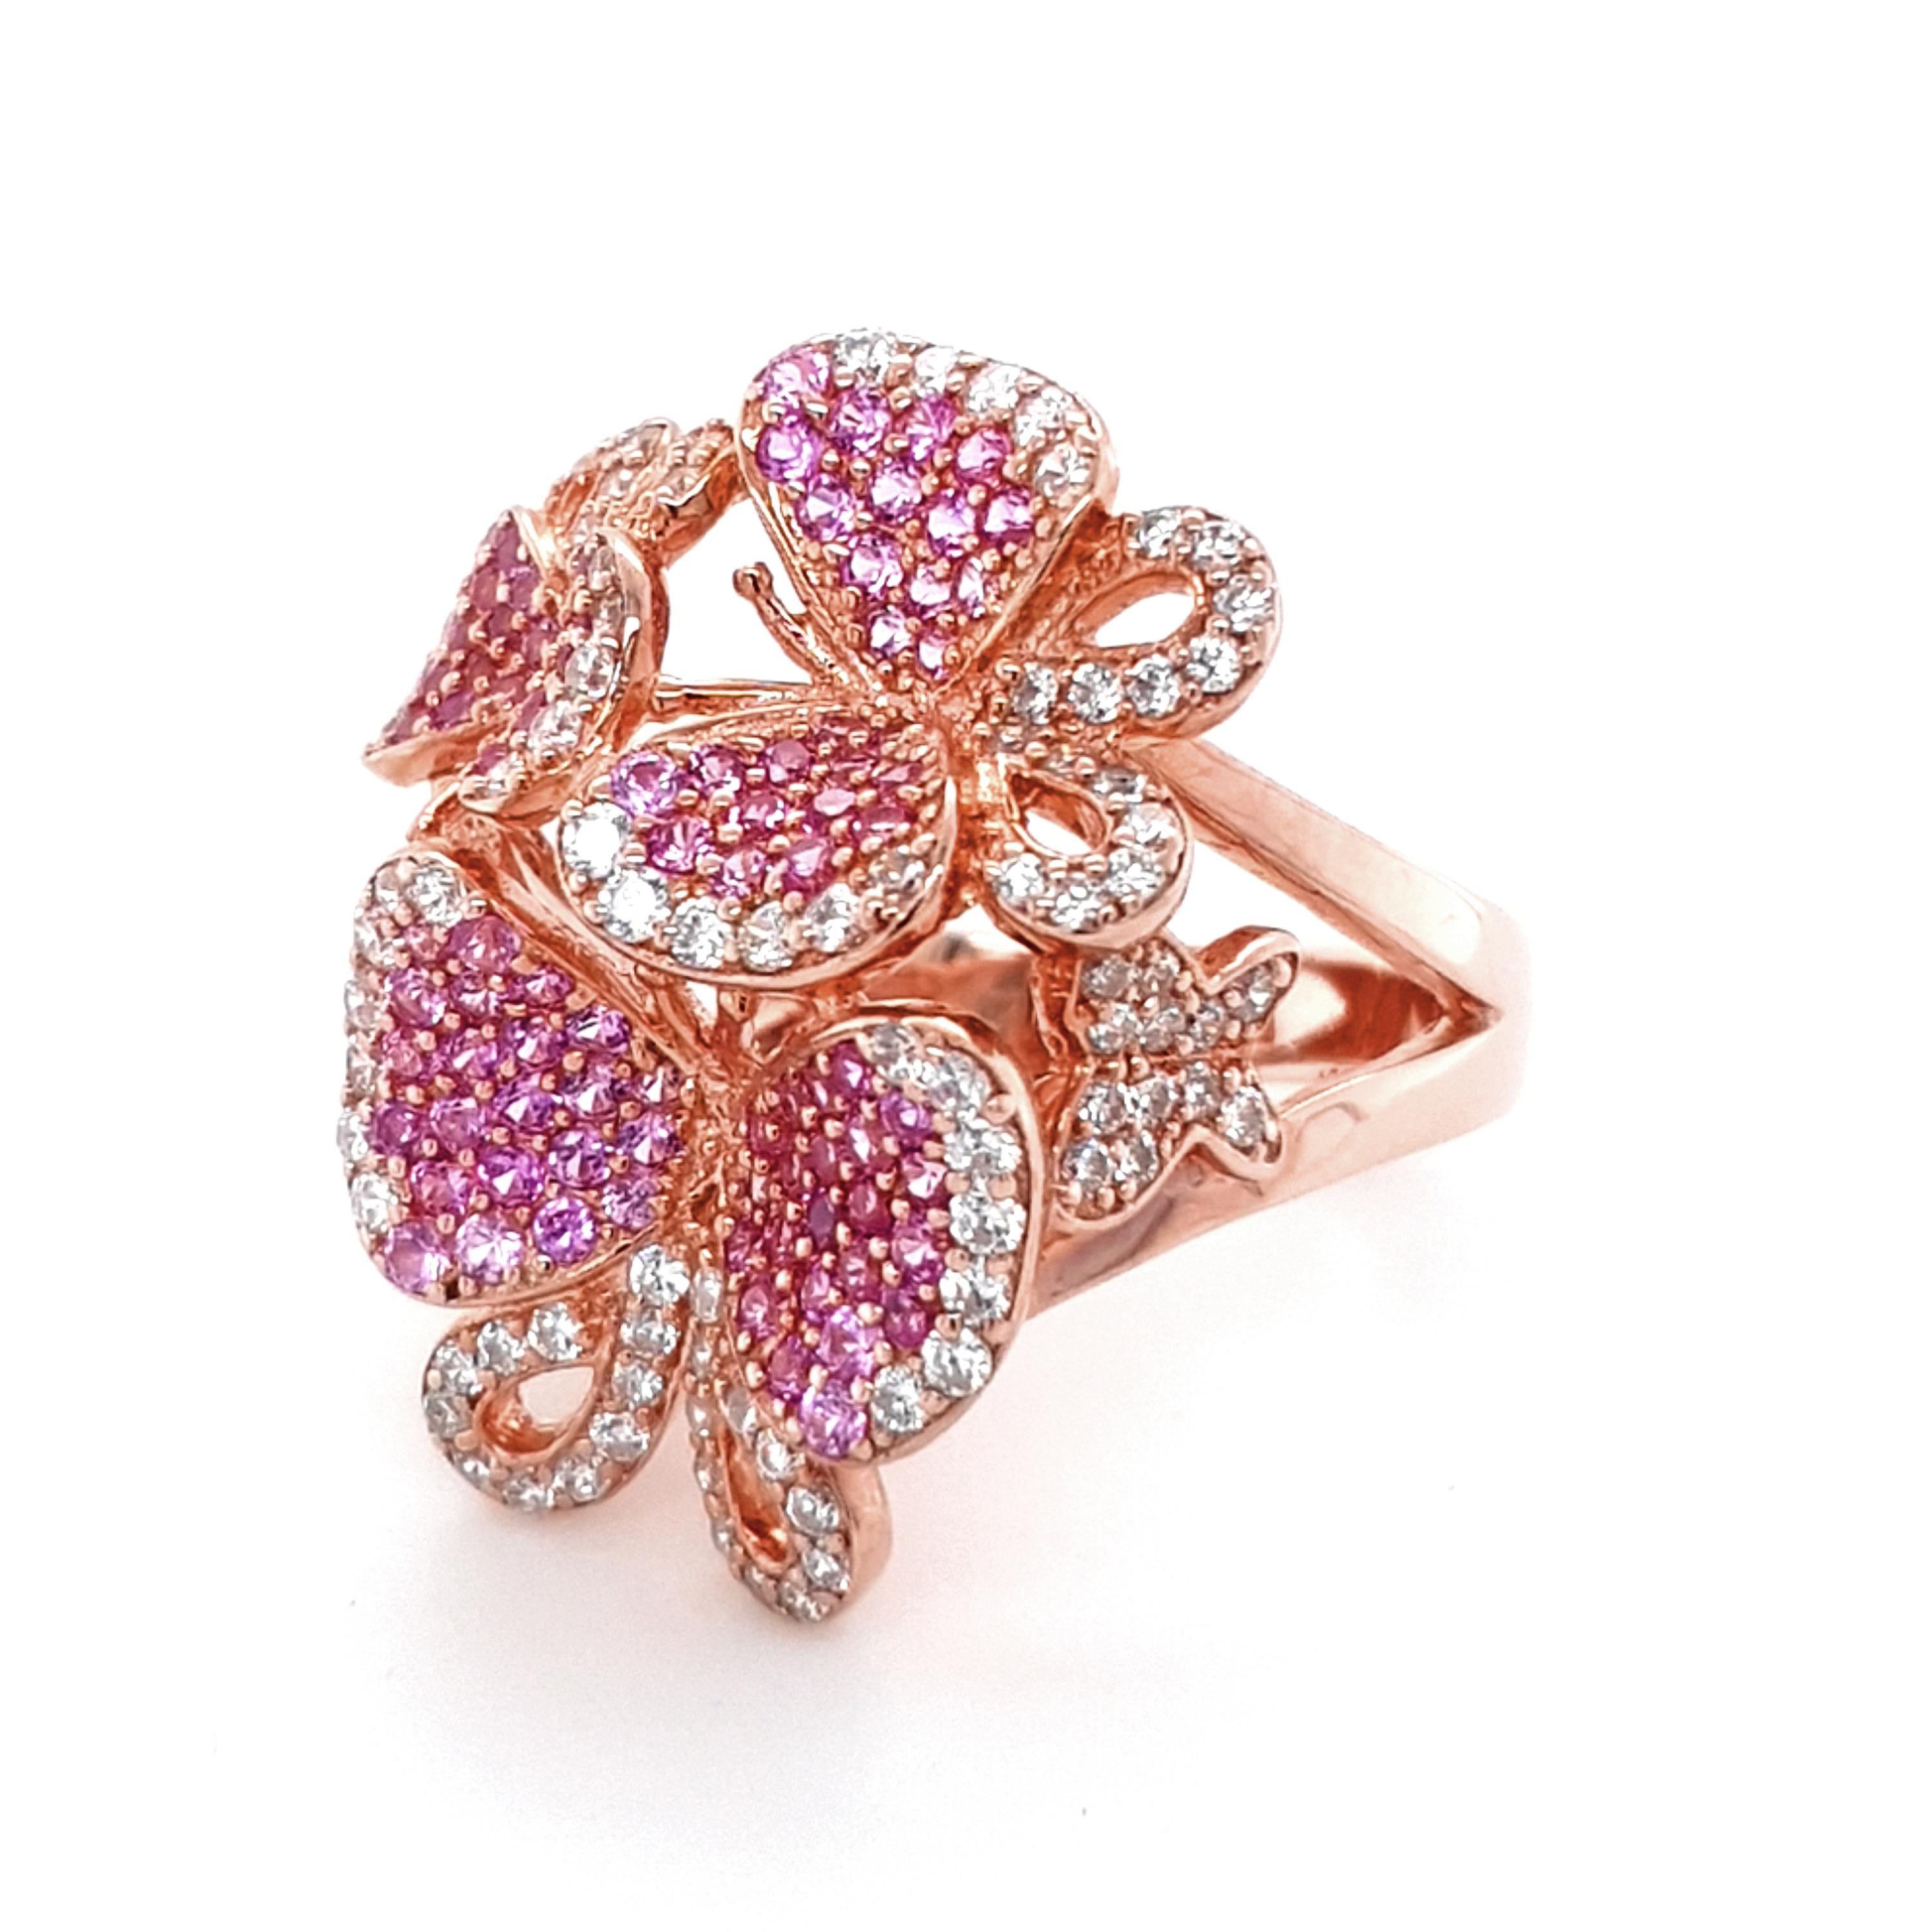 Butterfly captures the feminine essence and the carefree, joyful movement of these intricate and delicate creatures in sparkling weightless jewels. Butterfly cluster ring bejewelled in pink and white cubic zirconia set in 18ct rose gold plate on